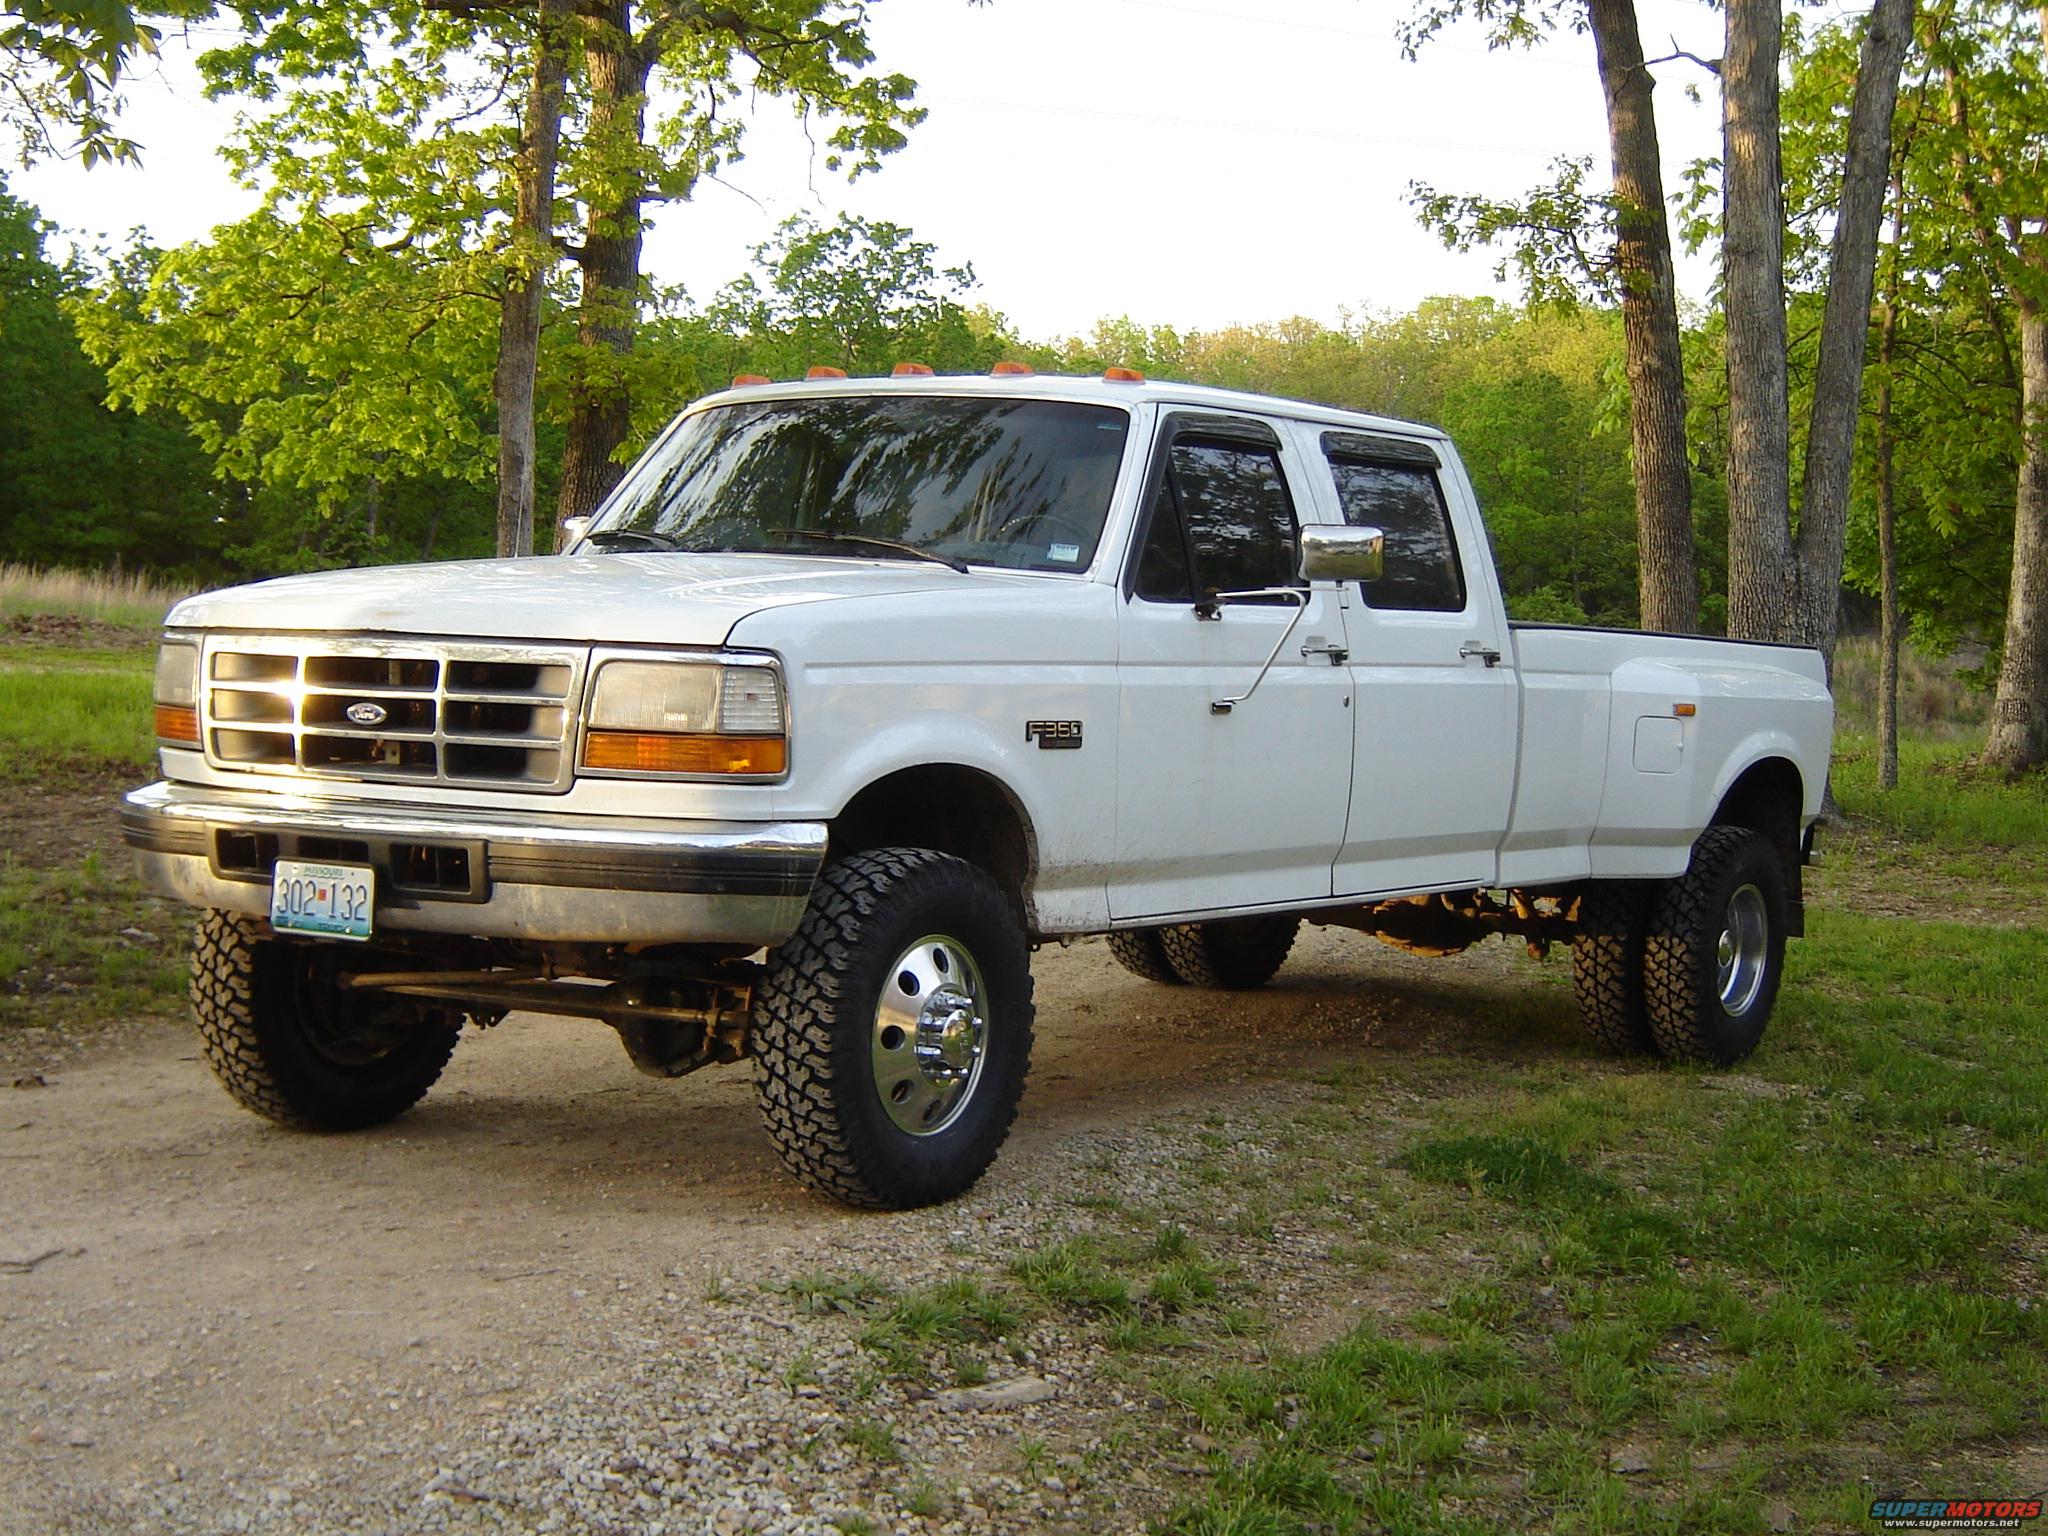 Ford f350 dually conversion kit #1